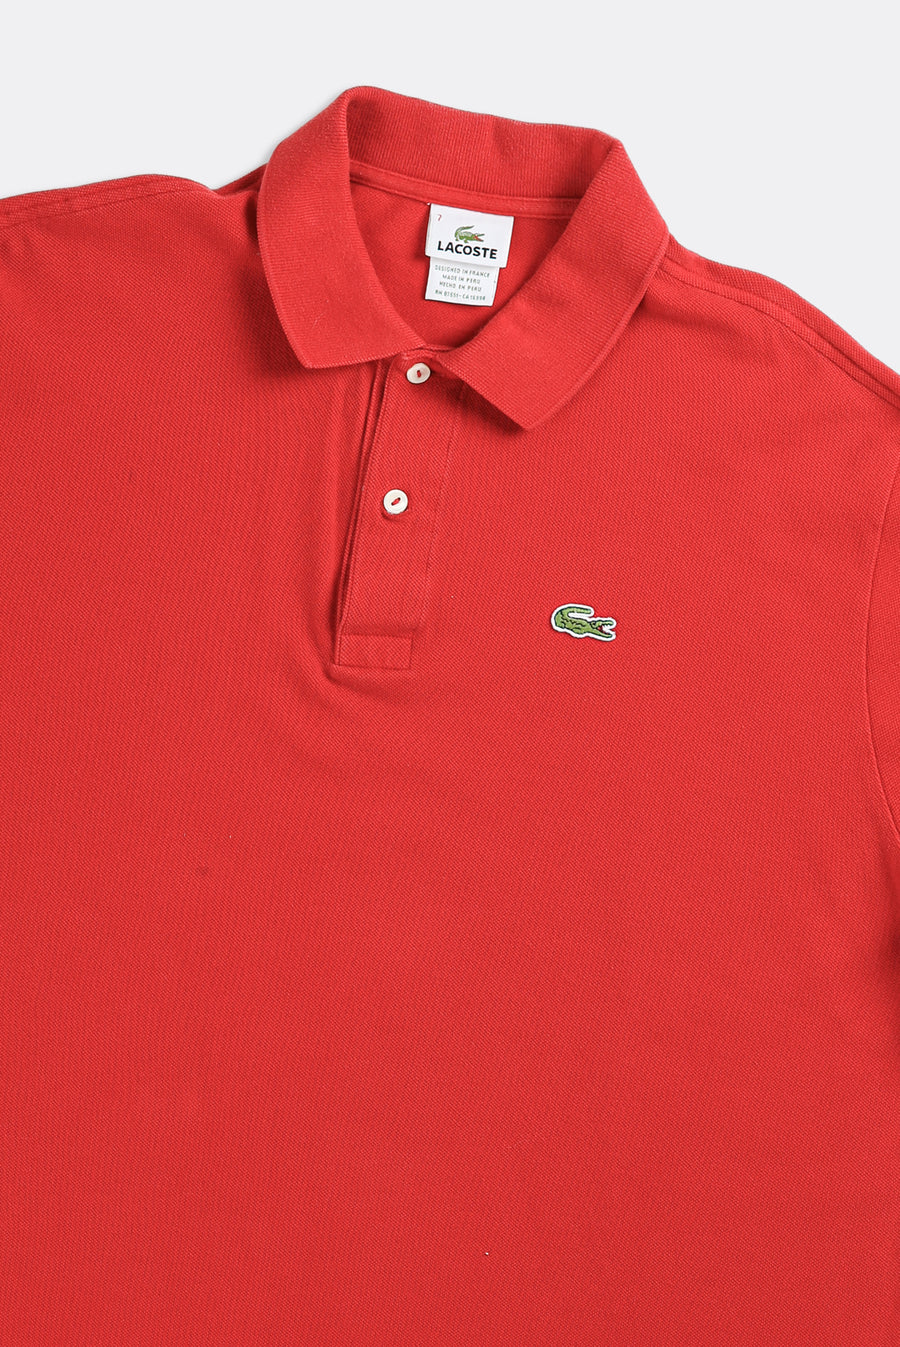 Vintage Lacoste Collared Tee